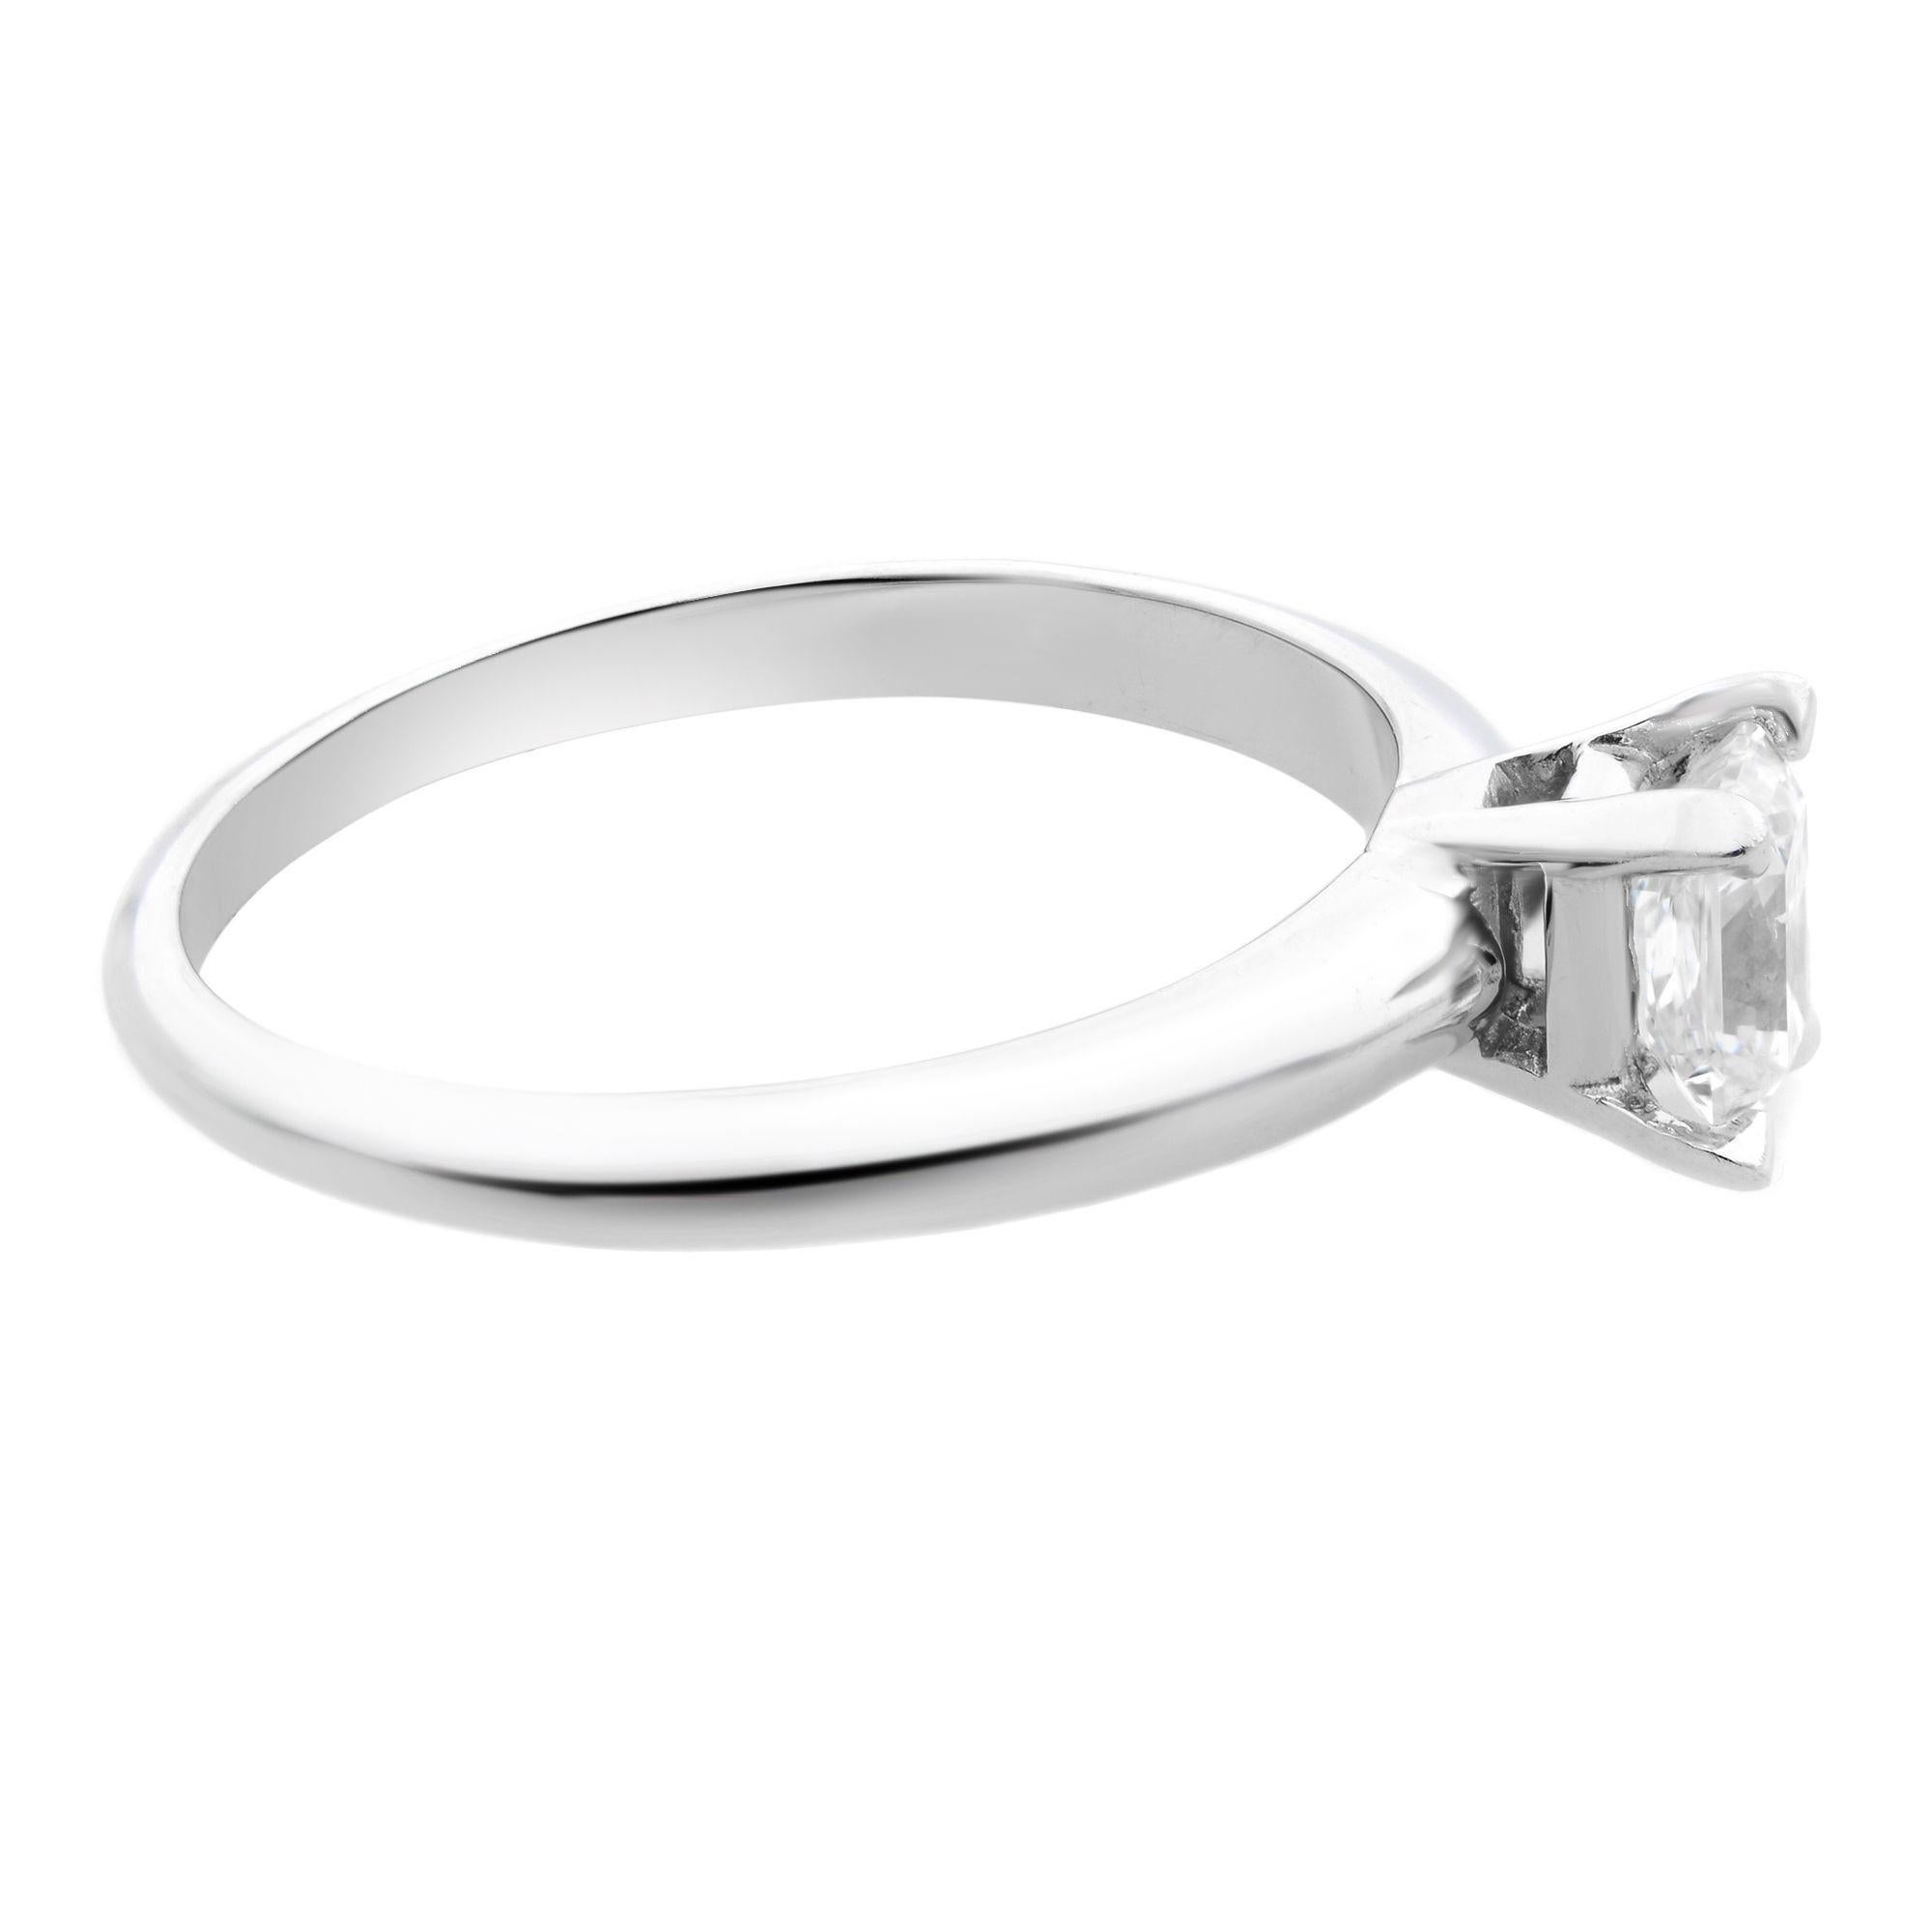 Show your love with this classic Rachel Koen solitaire engagement ring. This beautiful 14k white gold solitaire engagement ring is set with 0.30 total carat diamond, emerald cut, G color and clarity VS2. The width of the ring is 2.70mm and weighs